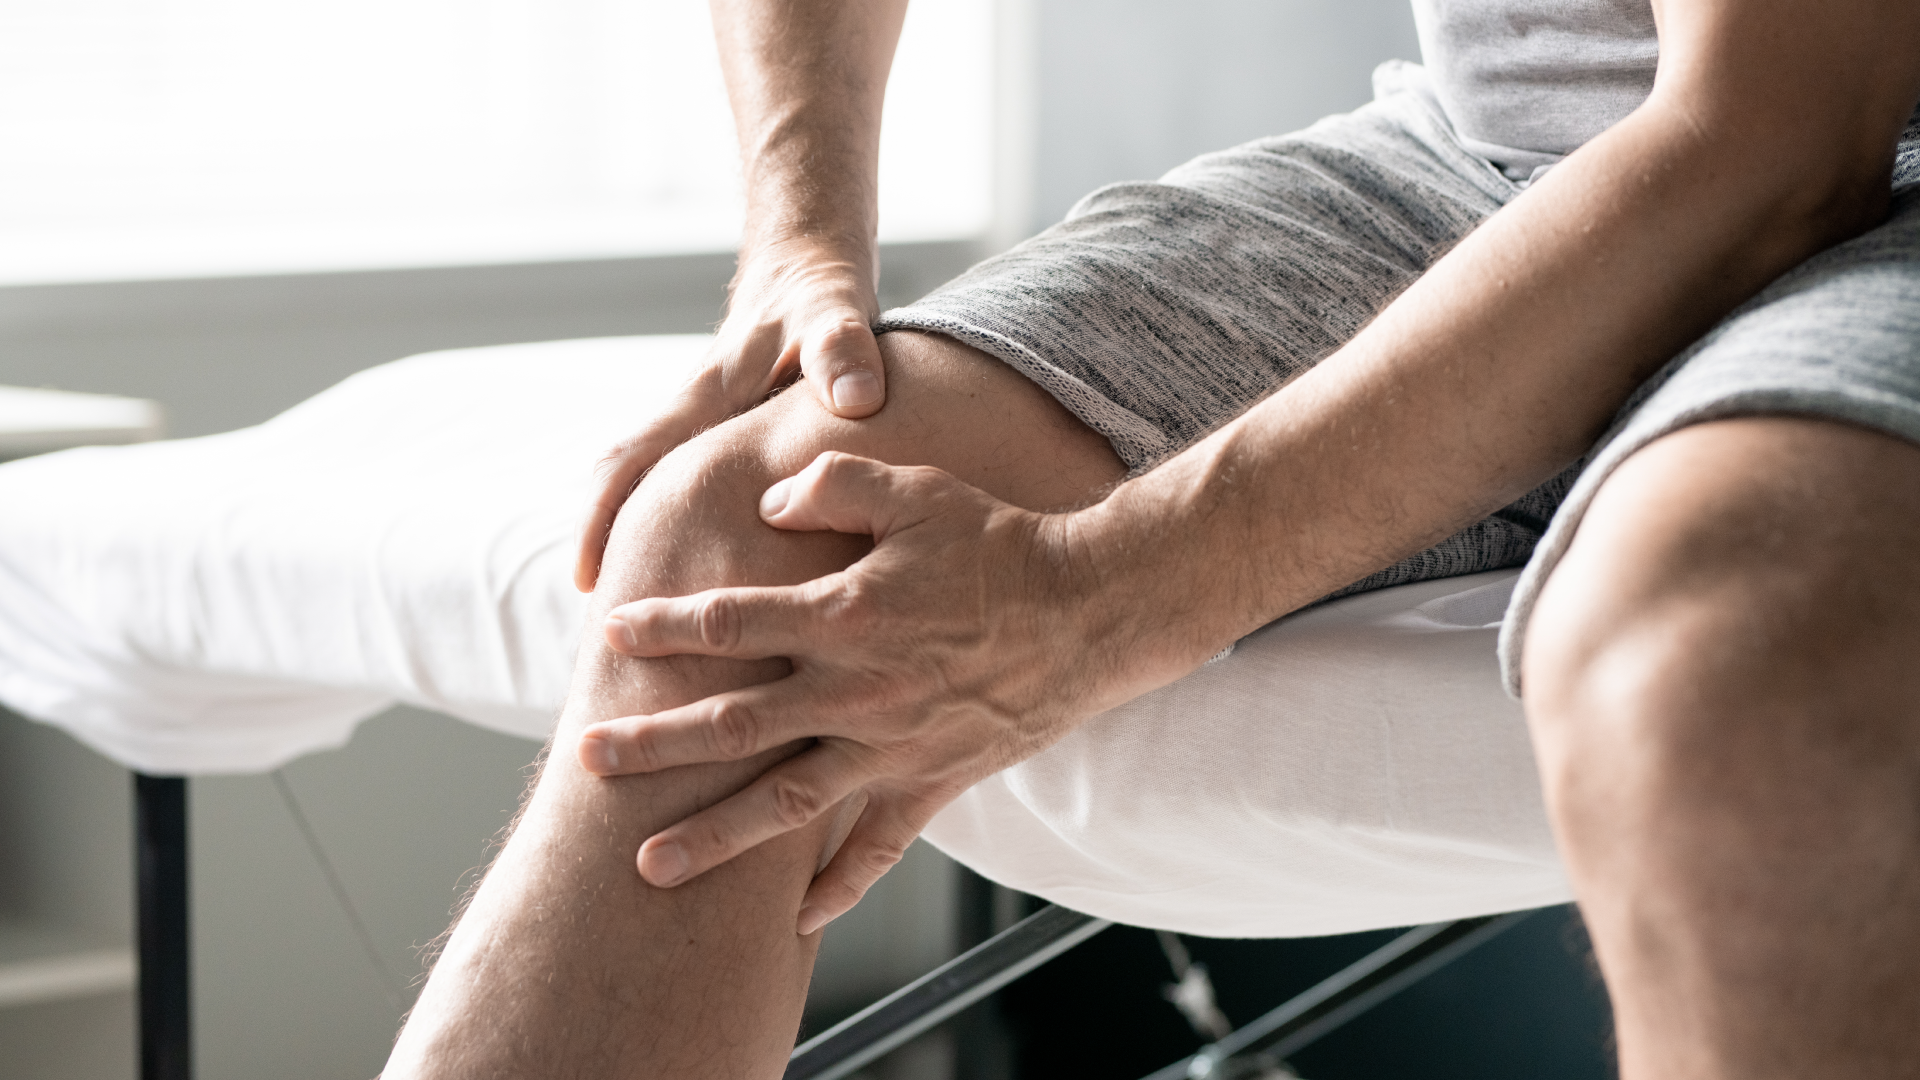 Flow Recovery helps with Rheumatic and Joint Pain